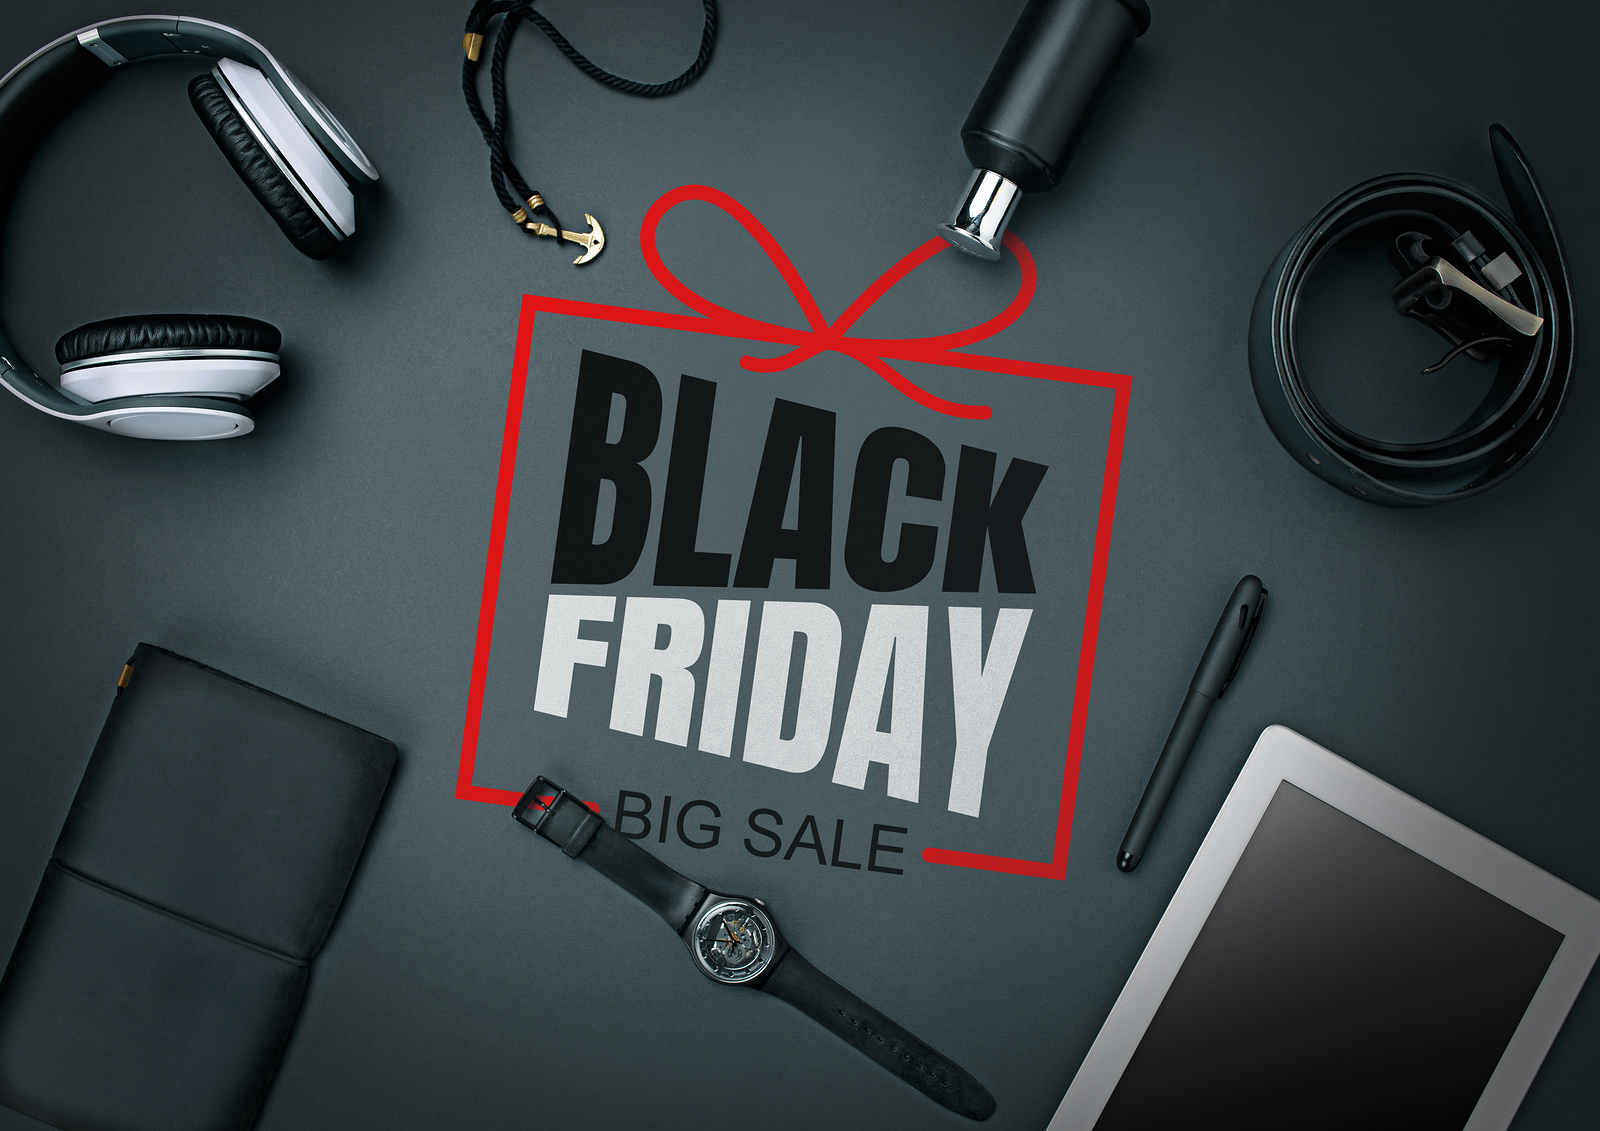 Cybercriminals are using fake Black Friday deals to steal your credit card details